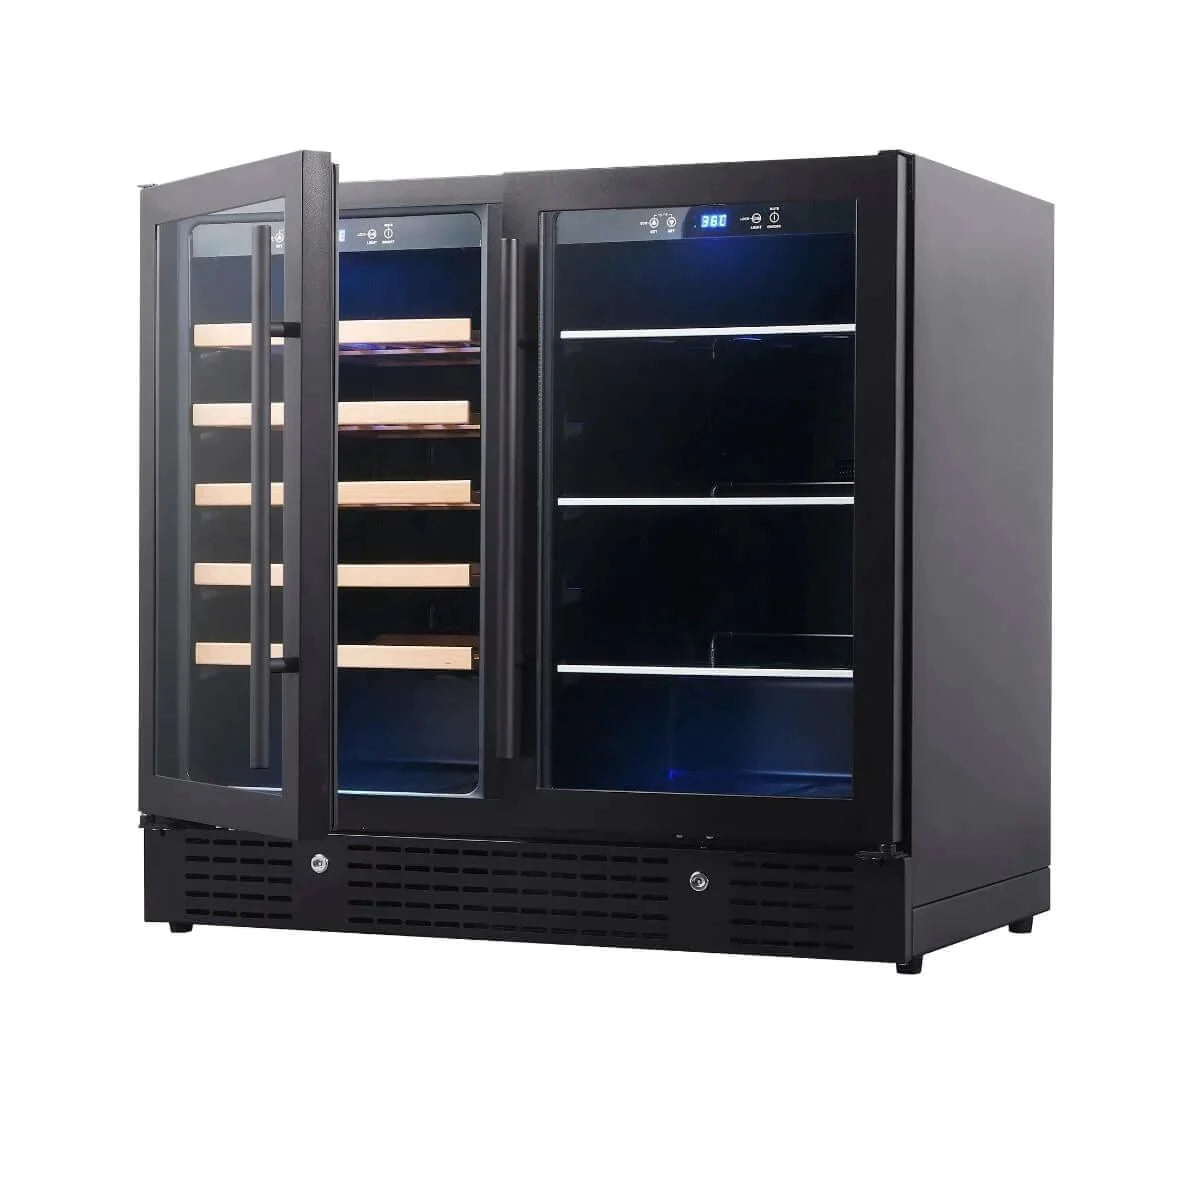 KingsBottle 36" Beer and Wine Cooler Combination with Low-E Glass Door - Stainless Steel Trim